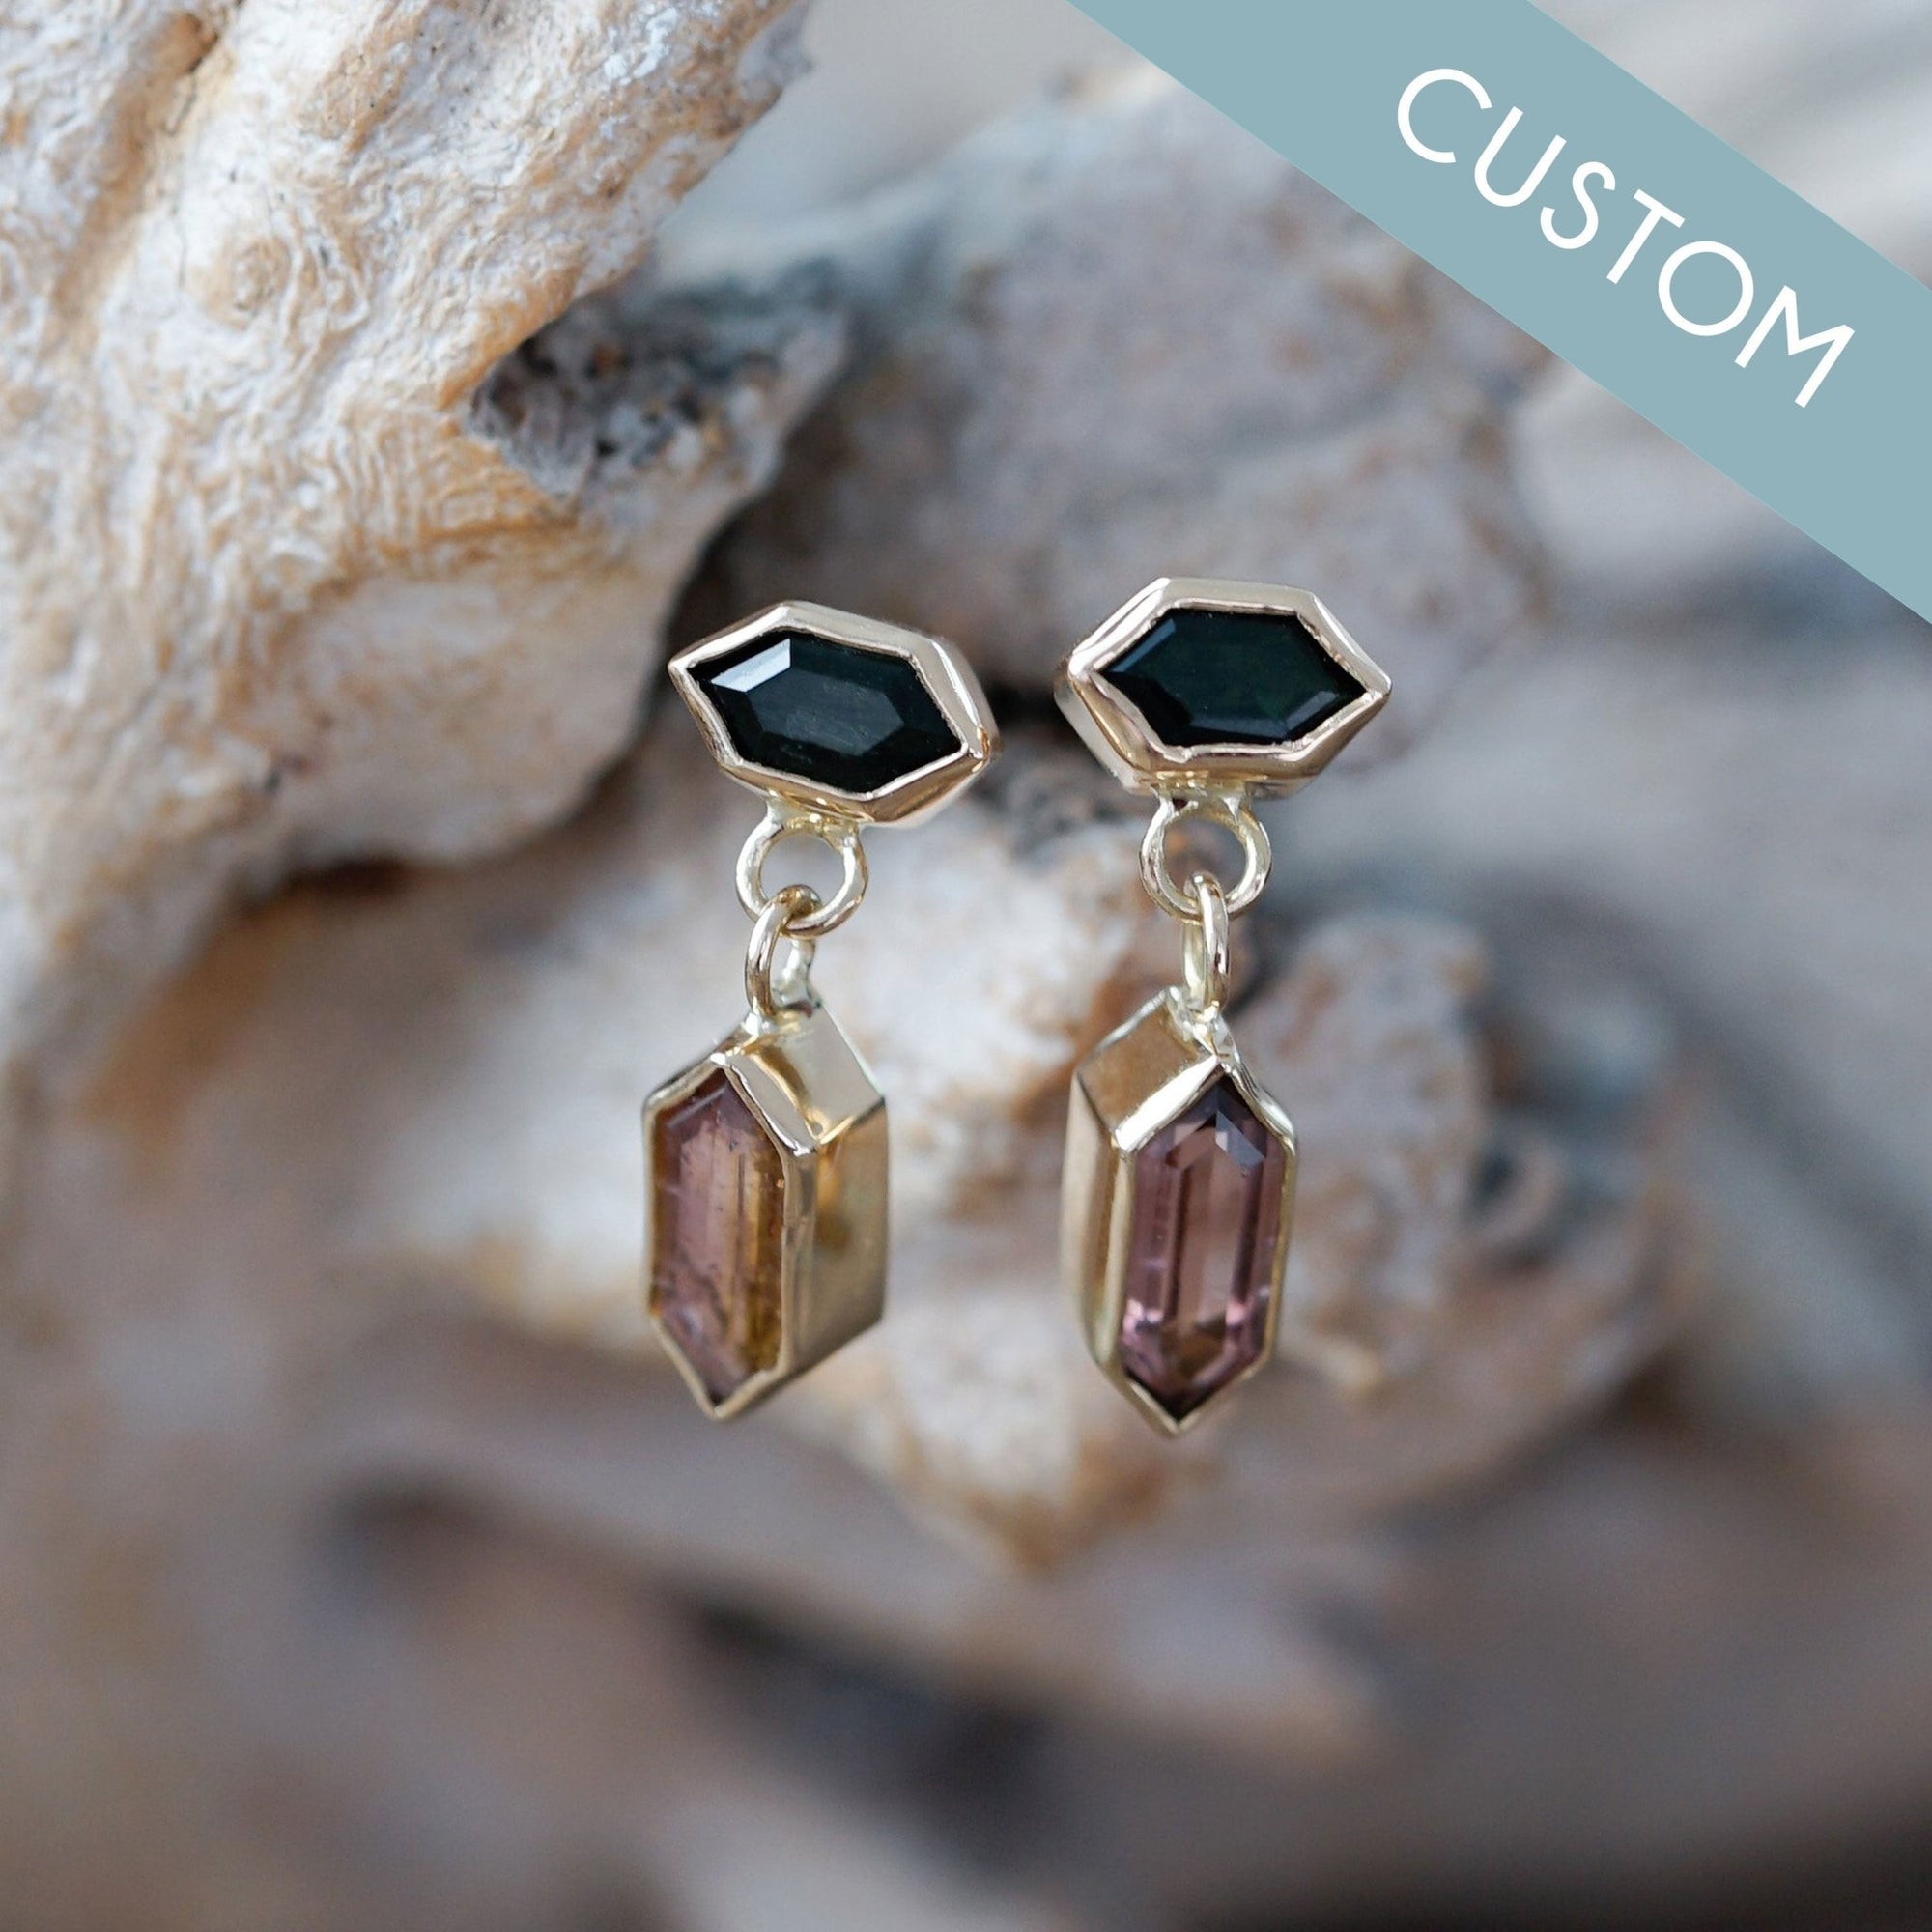 Custom Dangling Birthstone Earrings In Gold - Gardens of the Sun | Ethical Jewelry